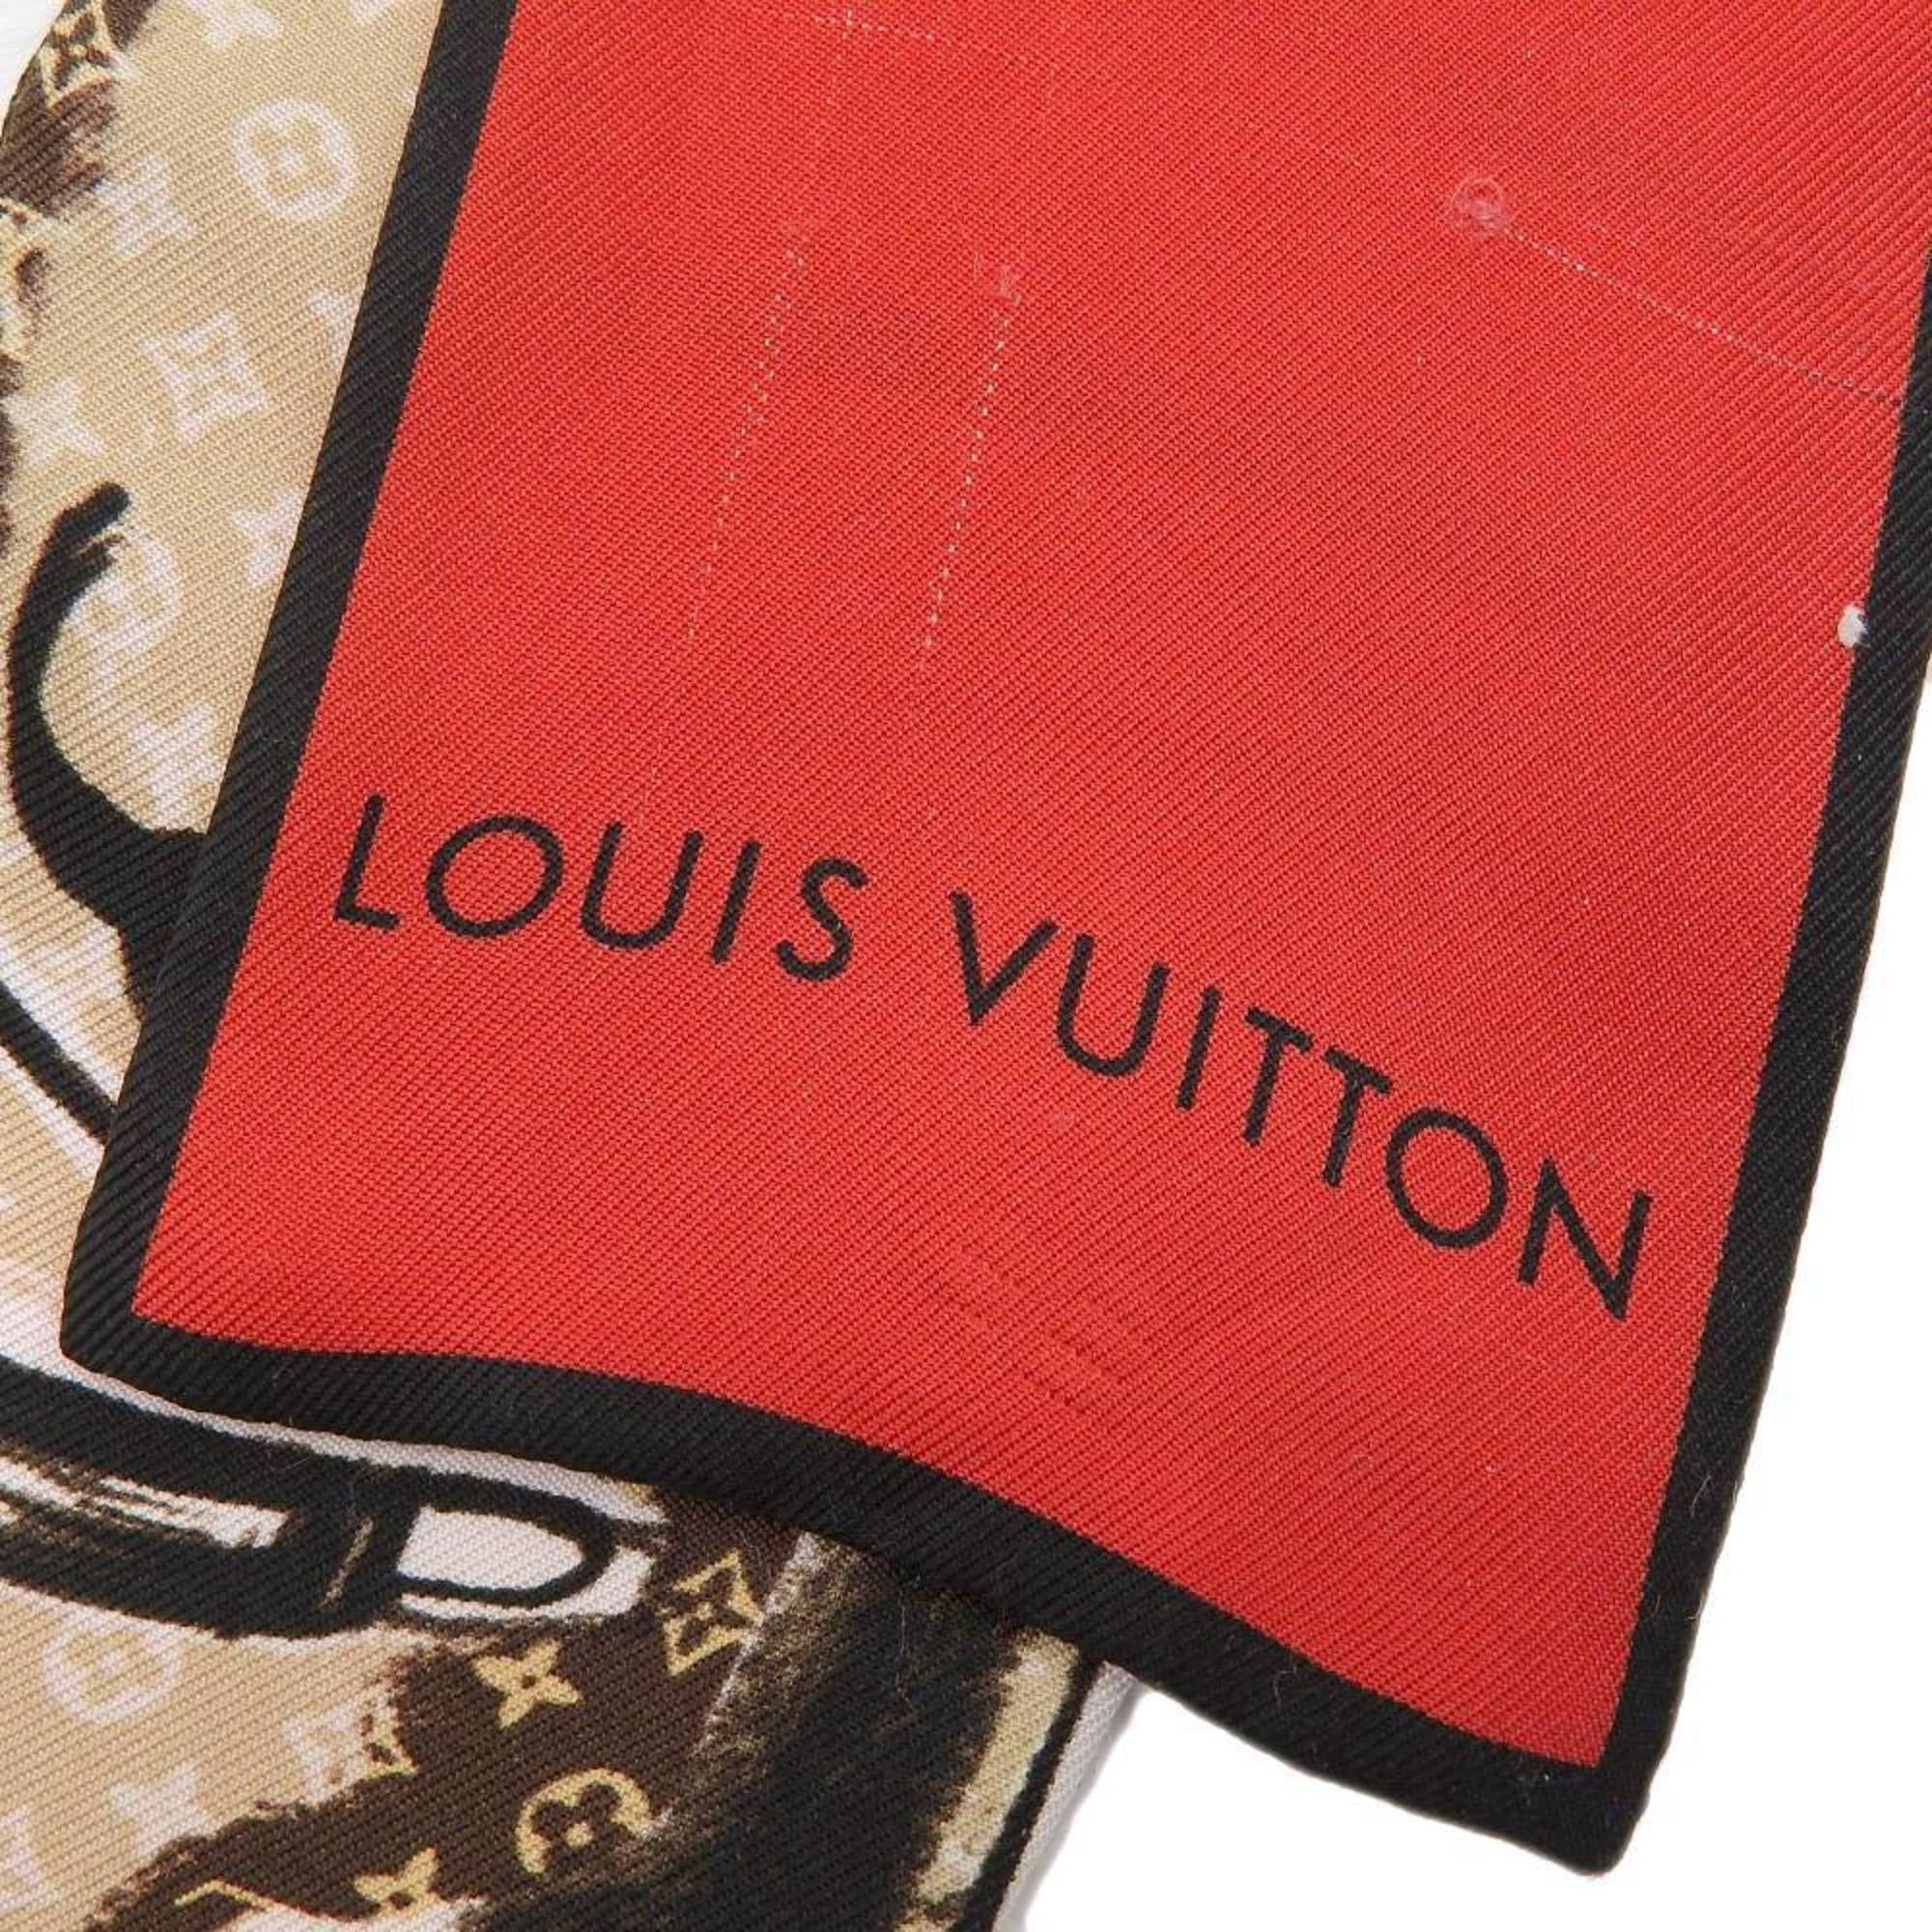 Authenticated used Louis Vuitton Louis Vuitton Bandeau Trunk Narrow Scarf Beige x Red M73964, Adult Unisex, Size: One Size